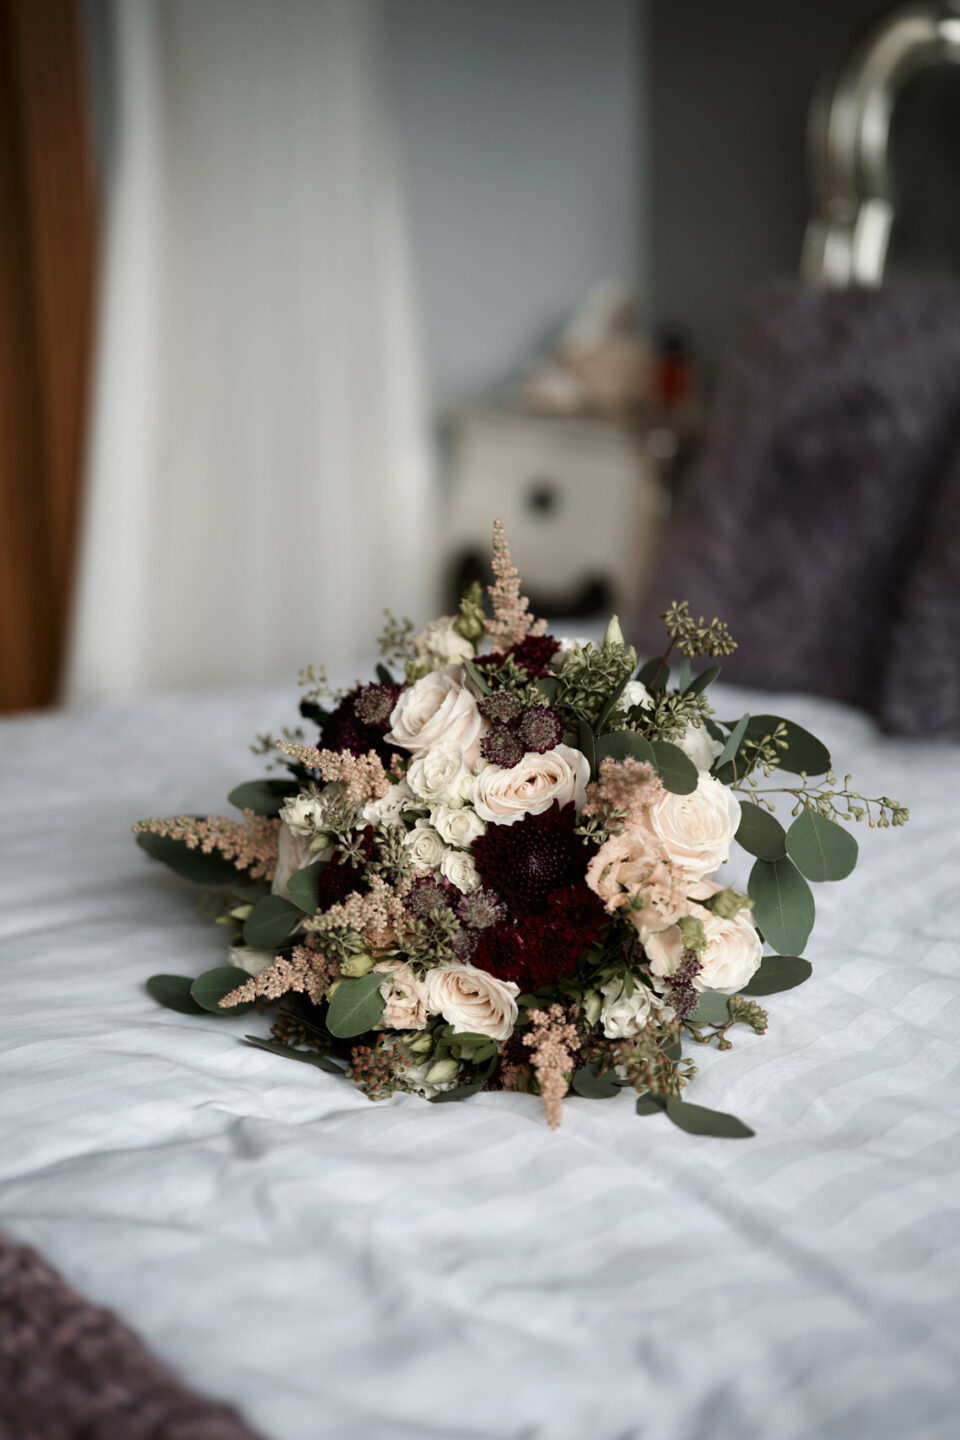 A bunch of flowers placed on a bed.